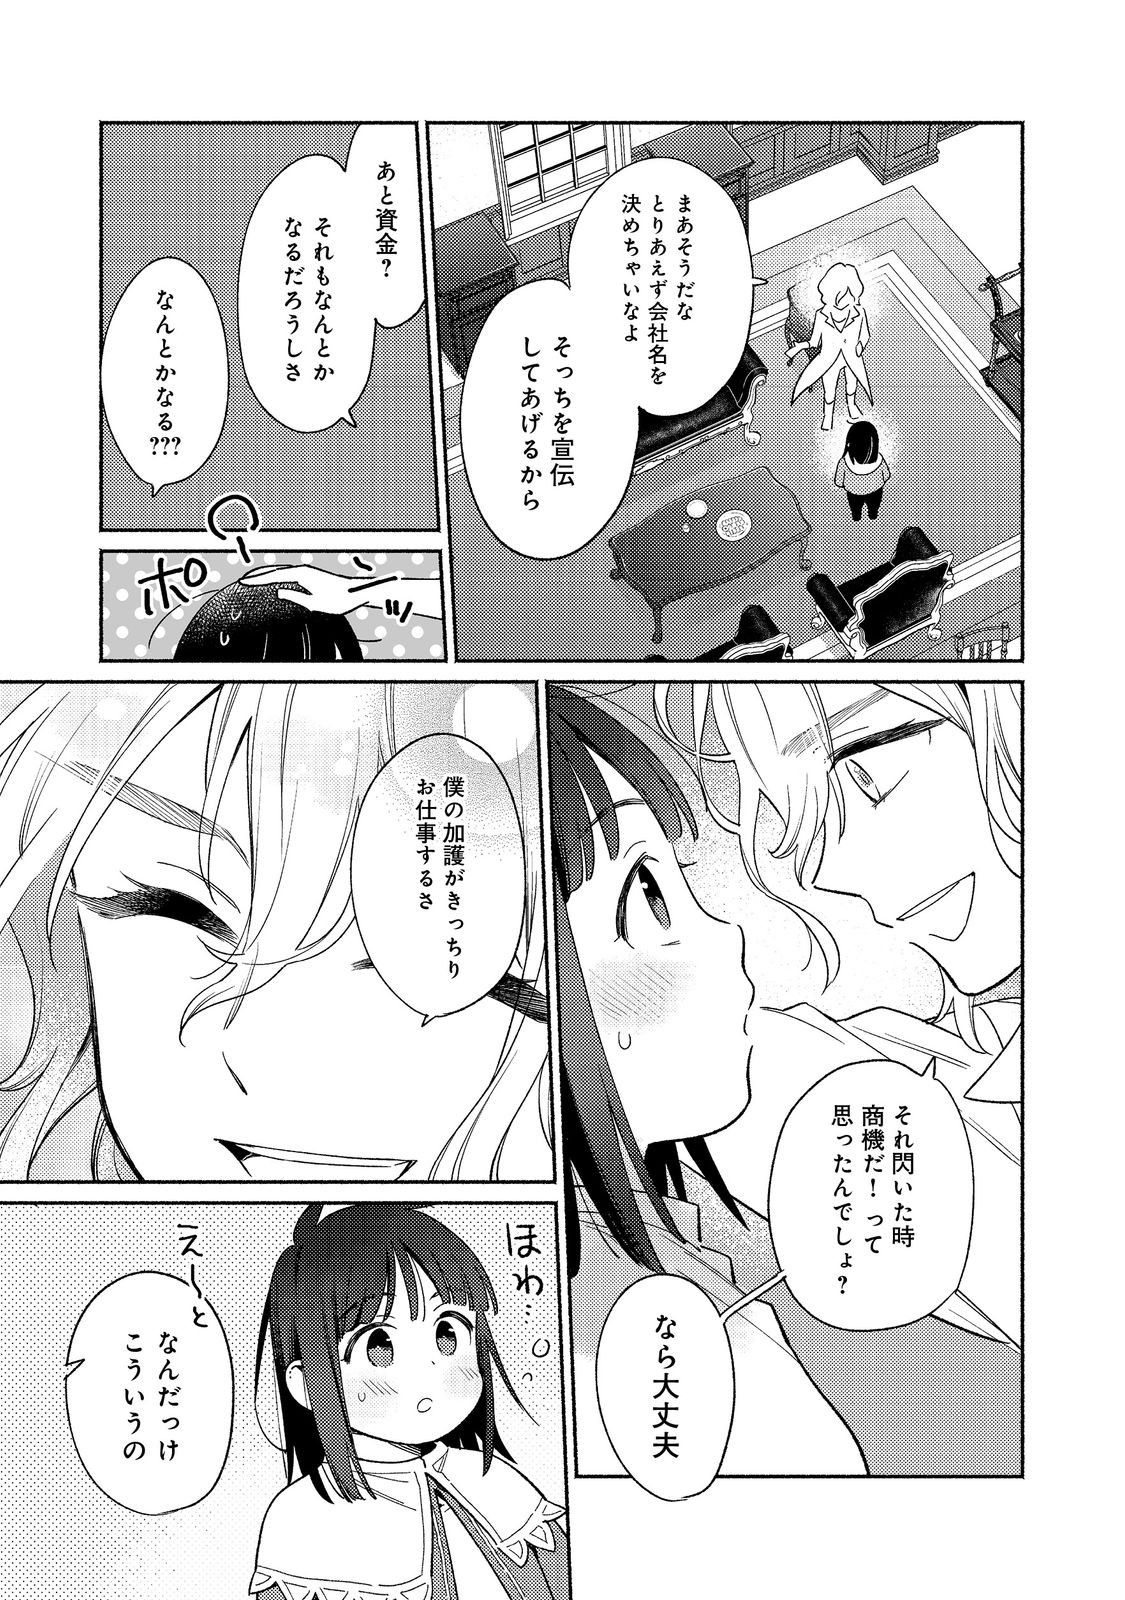 I’m the White Pig Nobleman 第19.2話 - Page 11